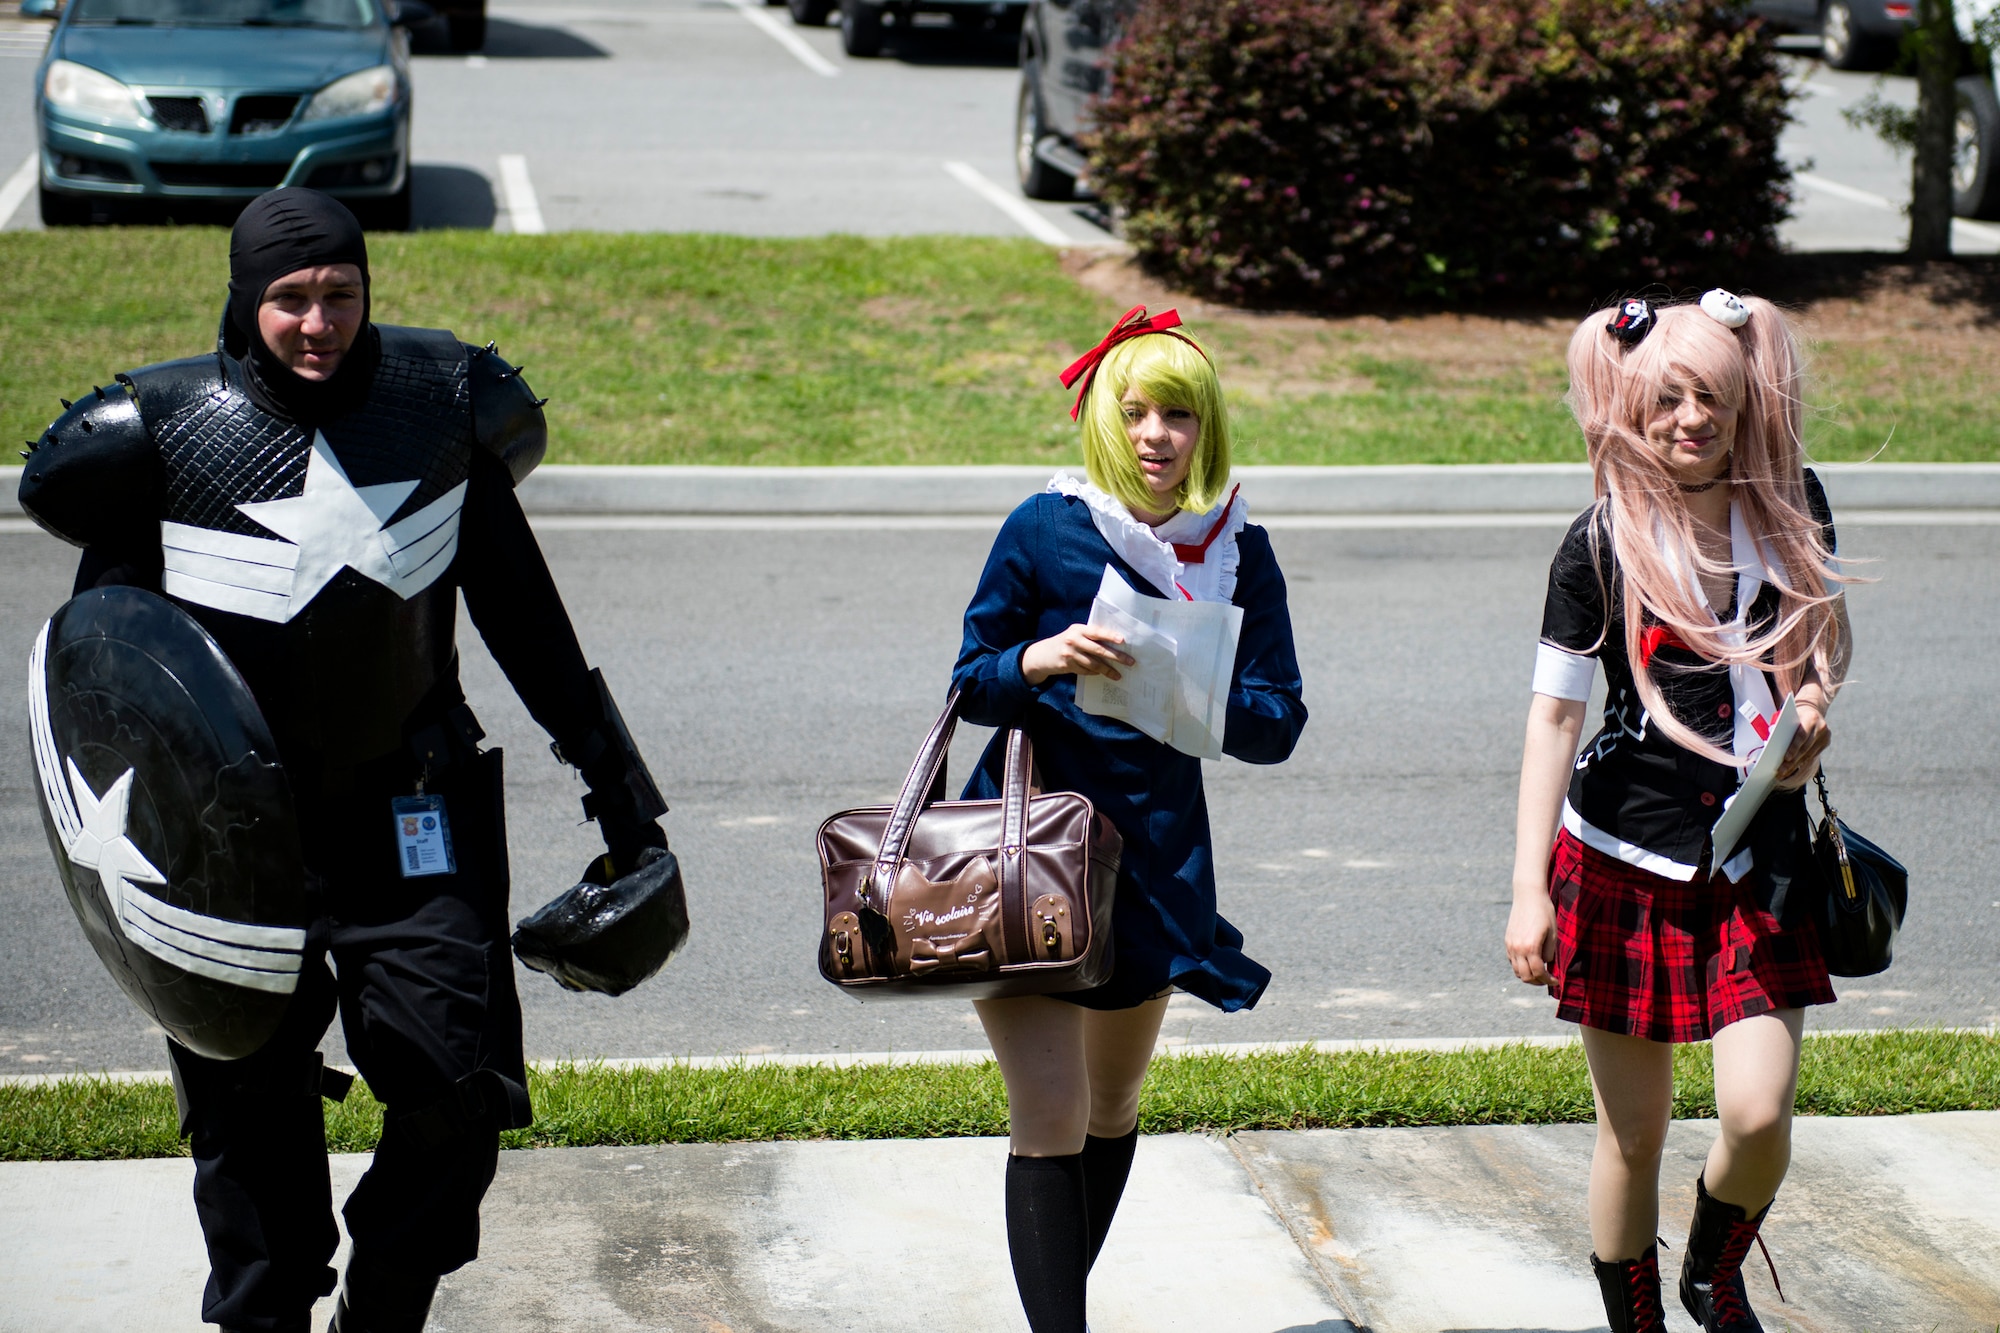 Staff Sgt. William Hannay, left, 723d Aircraft Maintenance Squadron weapons team chief, Kaycie, center, and Kayle Ackerman, cosplayers, walk to an event while at Tiger Con, April 14, 2018, in Valdosta, Ga. Tiger Con was a convention, open to Moody residents and the local community, geared toward giving pop culture enthusiasts a chance to dress and role play as their favorite movie, TV show or comic characters. The event included a costume contest, an anime themed café, pop-culture artist panels along with shopping vendors and a guest appearance of veteran voice actor Richard Epcar, who’s known for portraying Raiden in the video series Mortal Kombat. (U.S. Air Force photo by Airman 1st Class Erick Requadt)